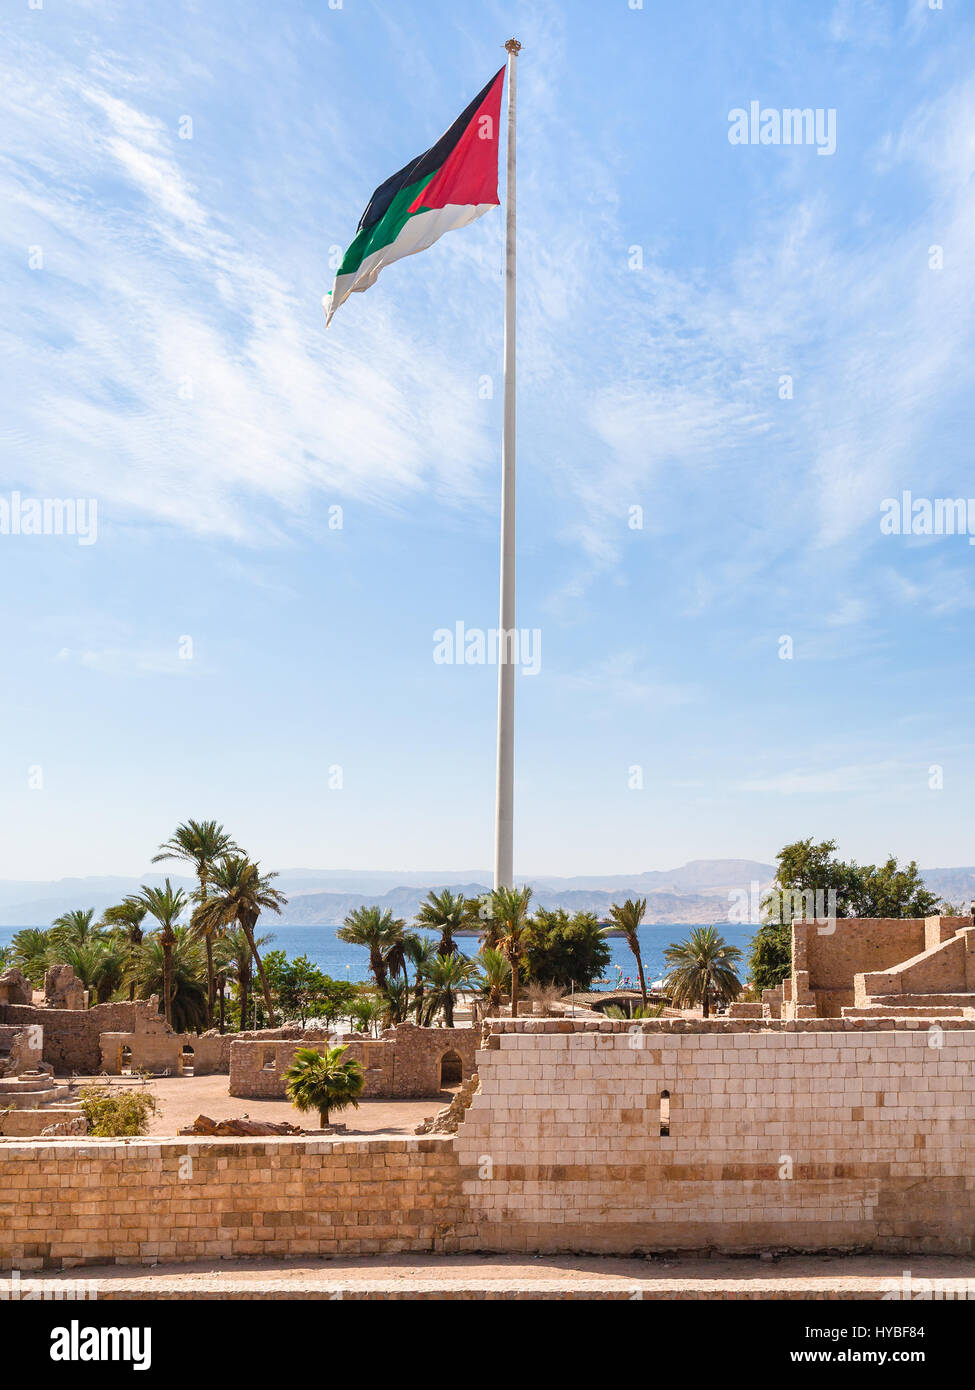 Travel to Middle East country Kingdom of Jordan - Flag of the Arab Revolt over Aqaba Fort in Aqaba city Stock Photo